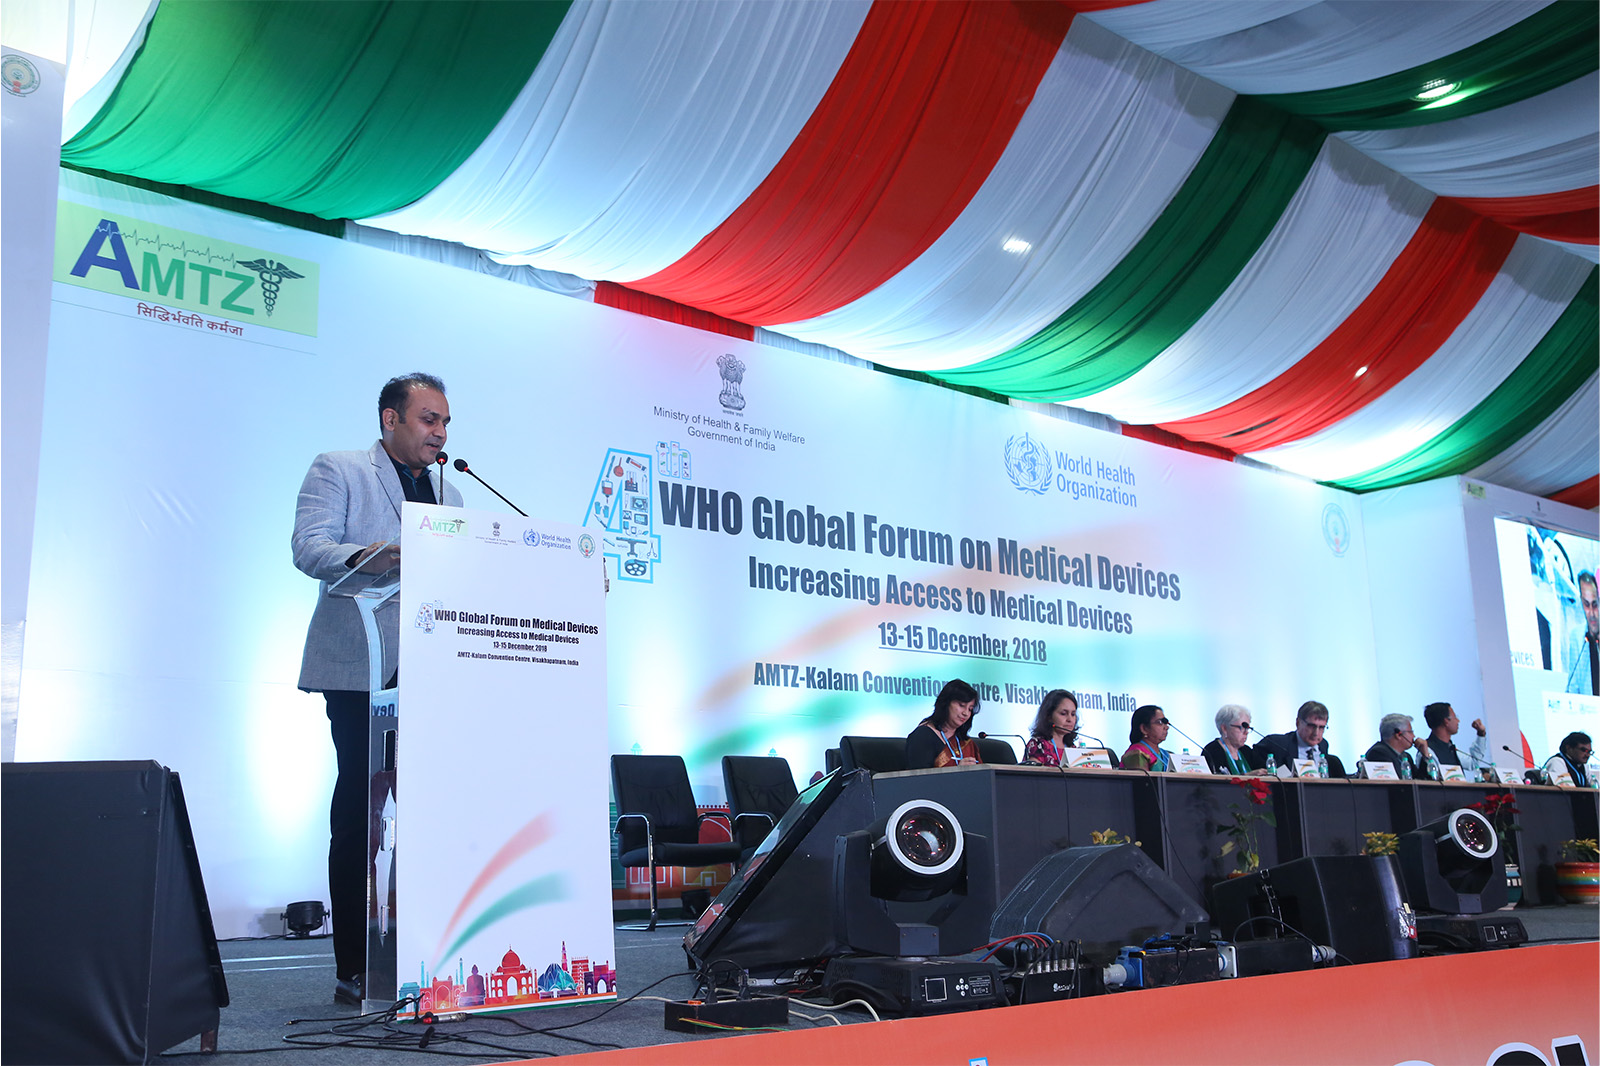 Dr. Jitendra Sharma & Virendra Sehwag converse amidst the WHO Global Forum on Medical Devices at AMTZ Health Care Technology and Medical Technology campus in India.